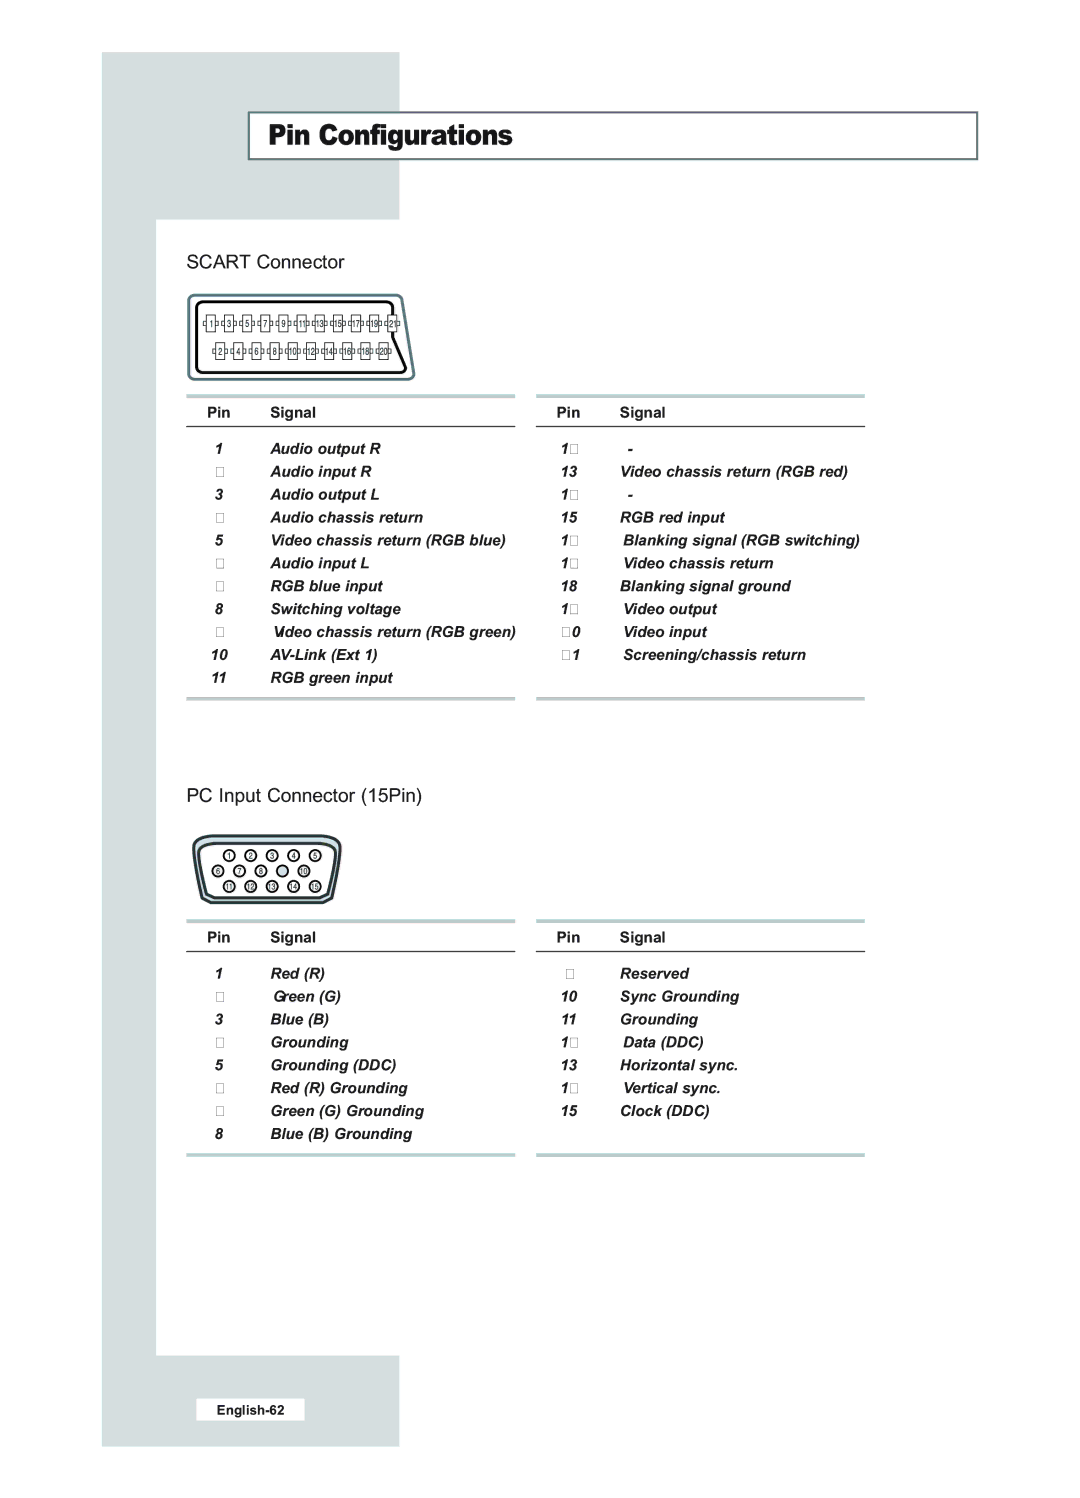 Samsung LE23R51B manual Pin Configurations, Scart Connector 